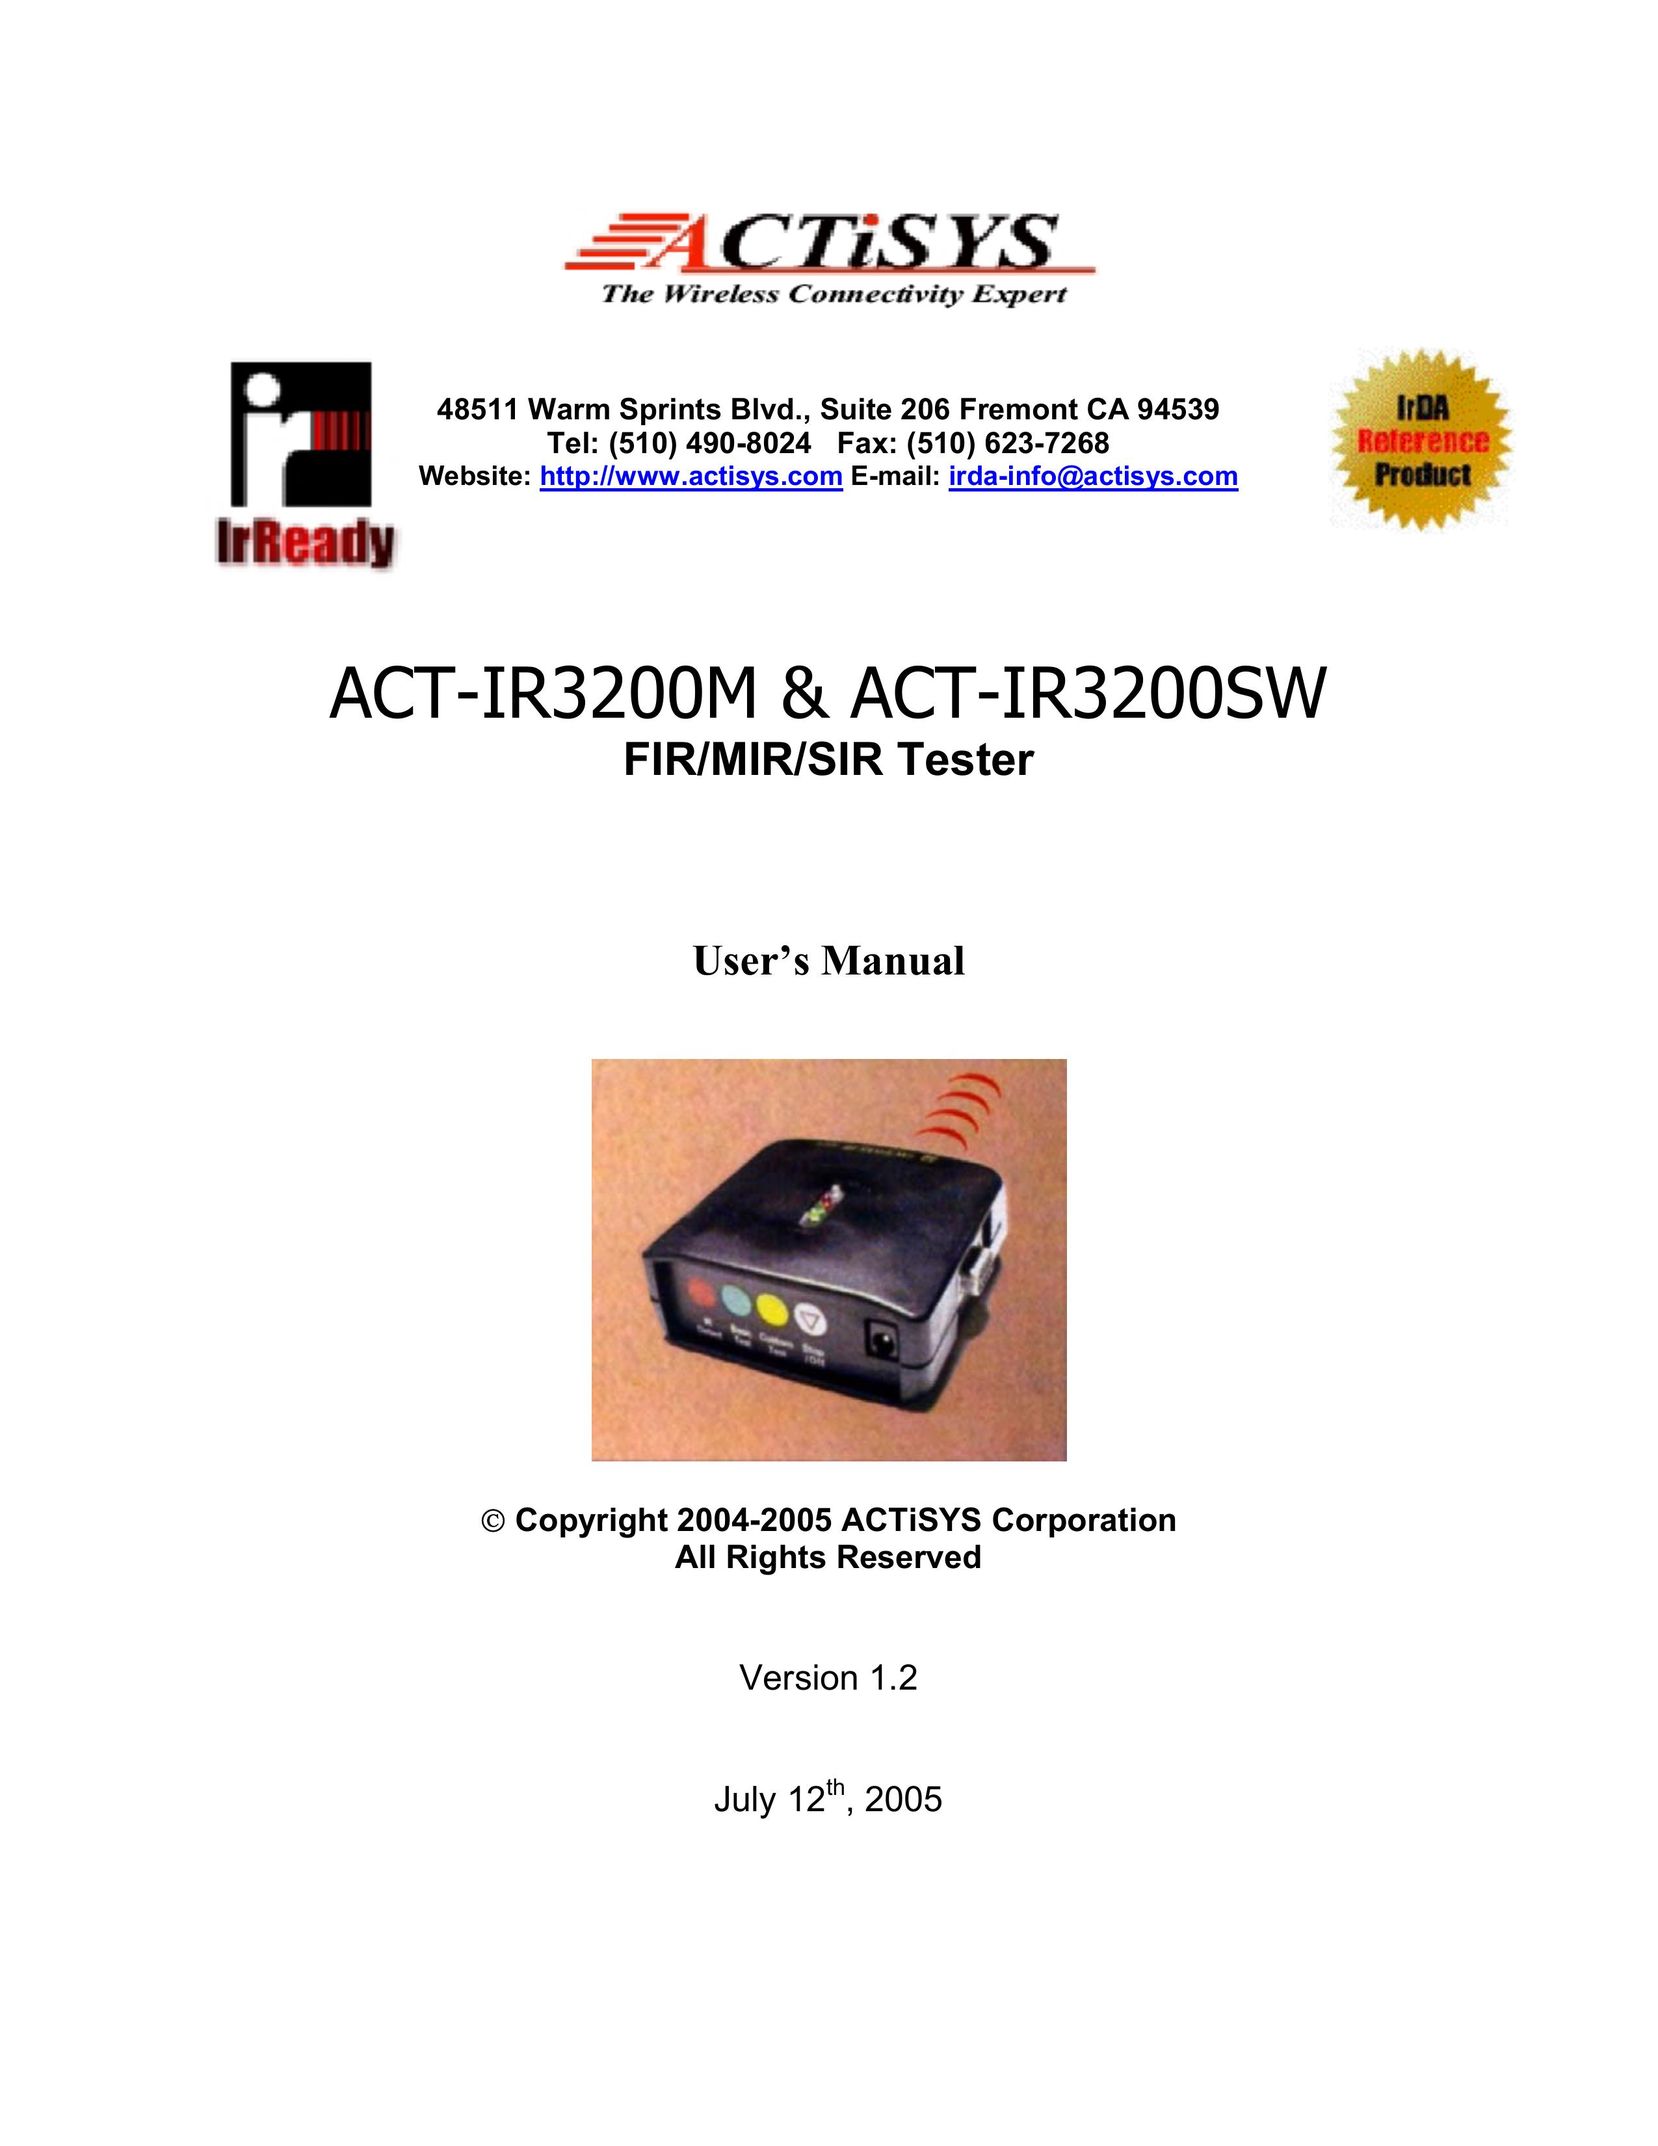 ACTiSYS ACT-IR3200M Computer Accessories User Manual